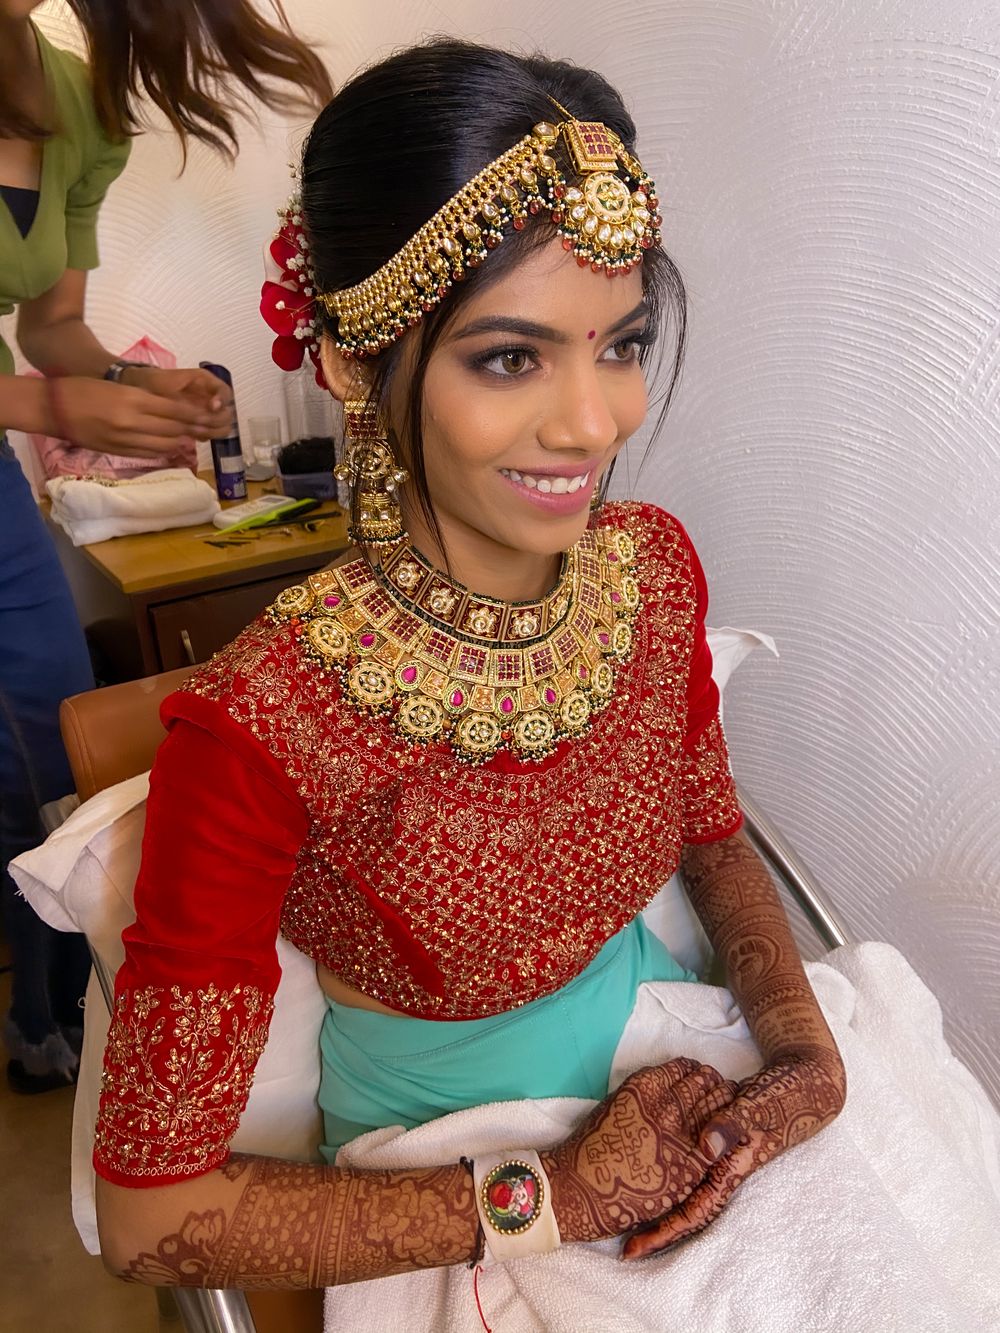 Photo From Meghna’s surreal wedding looks - By Nilomi Kapoor